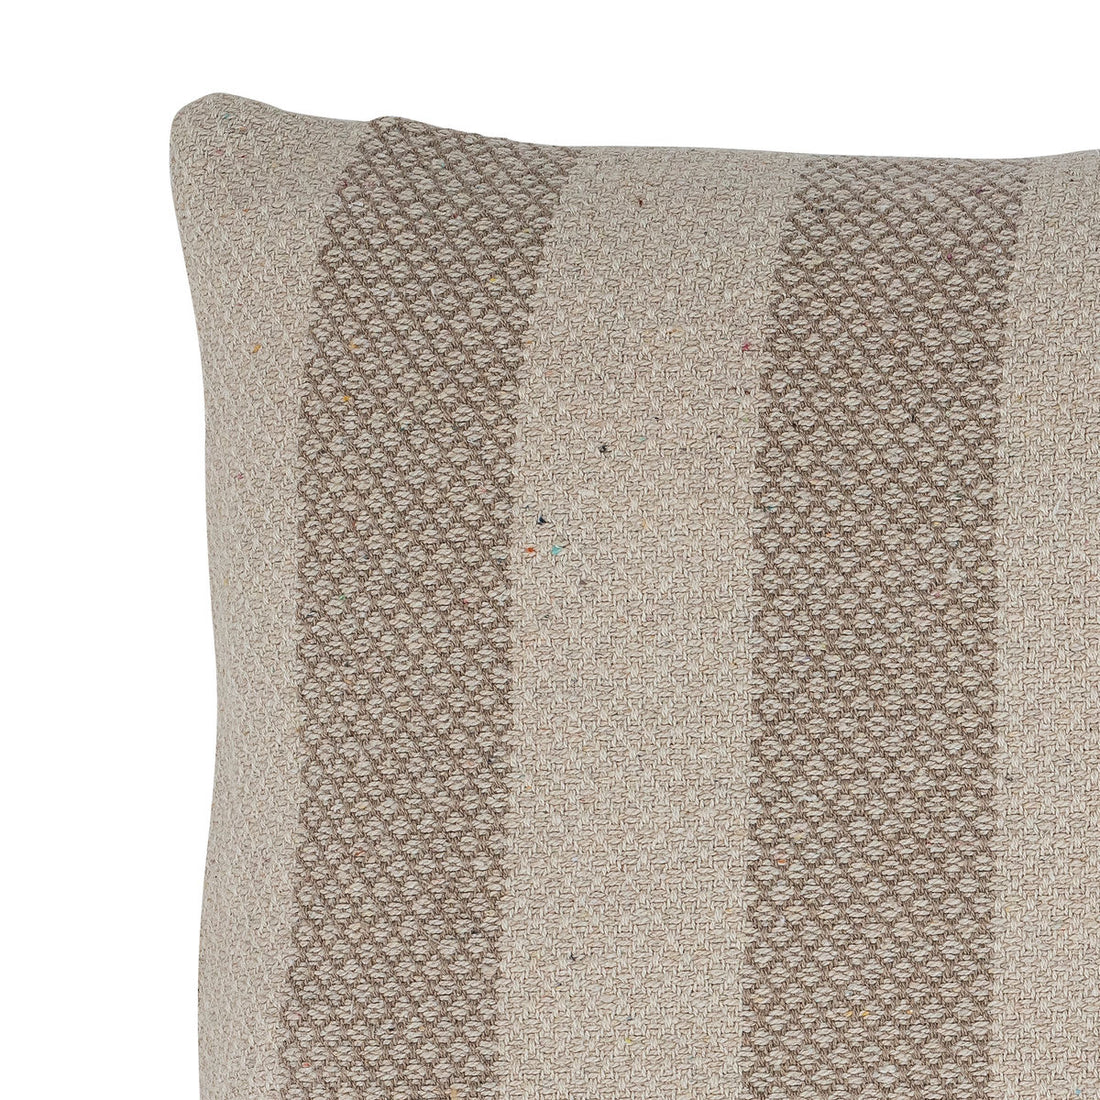 Bloomingville Eden Pillow, Brown, Recycled Cotton